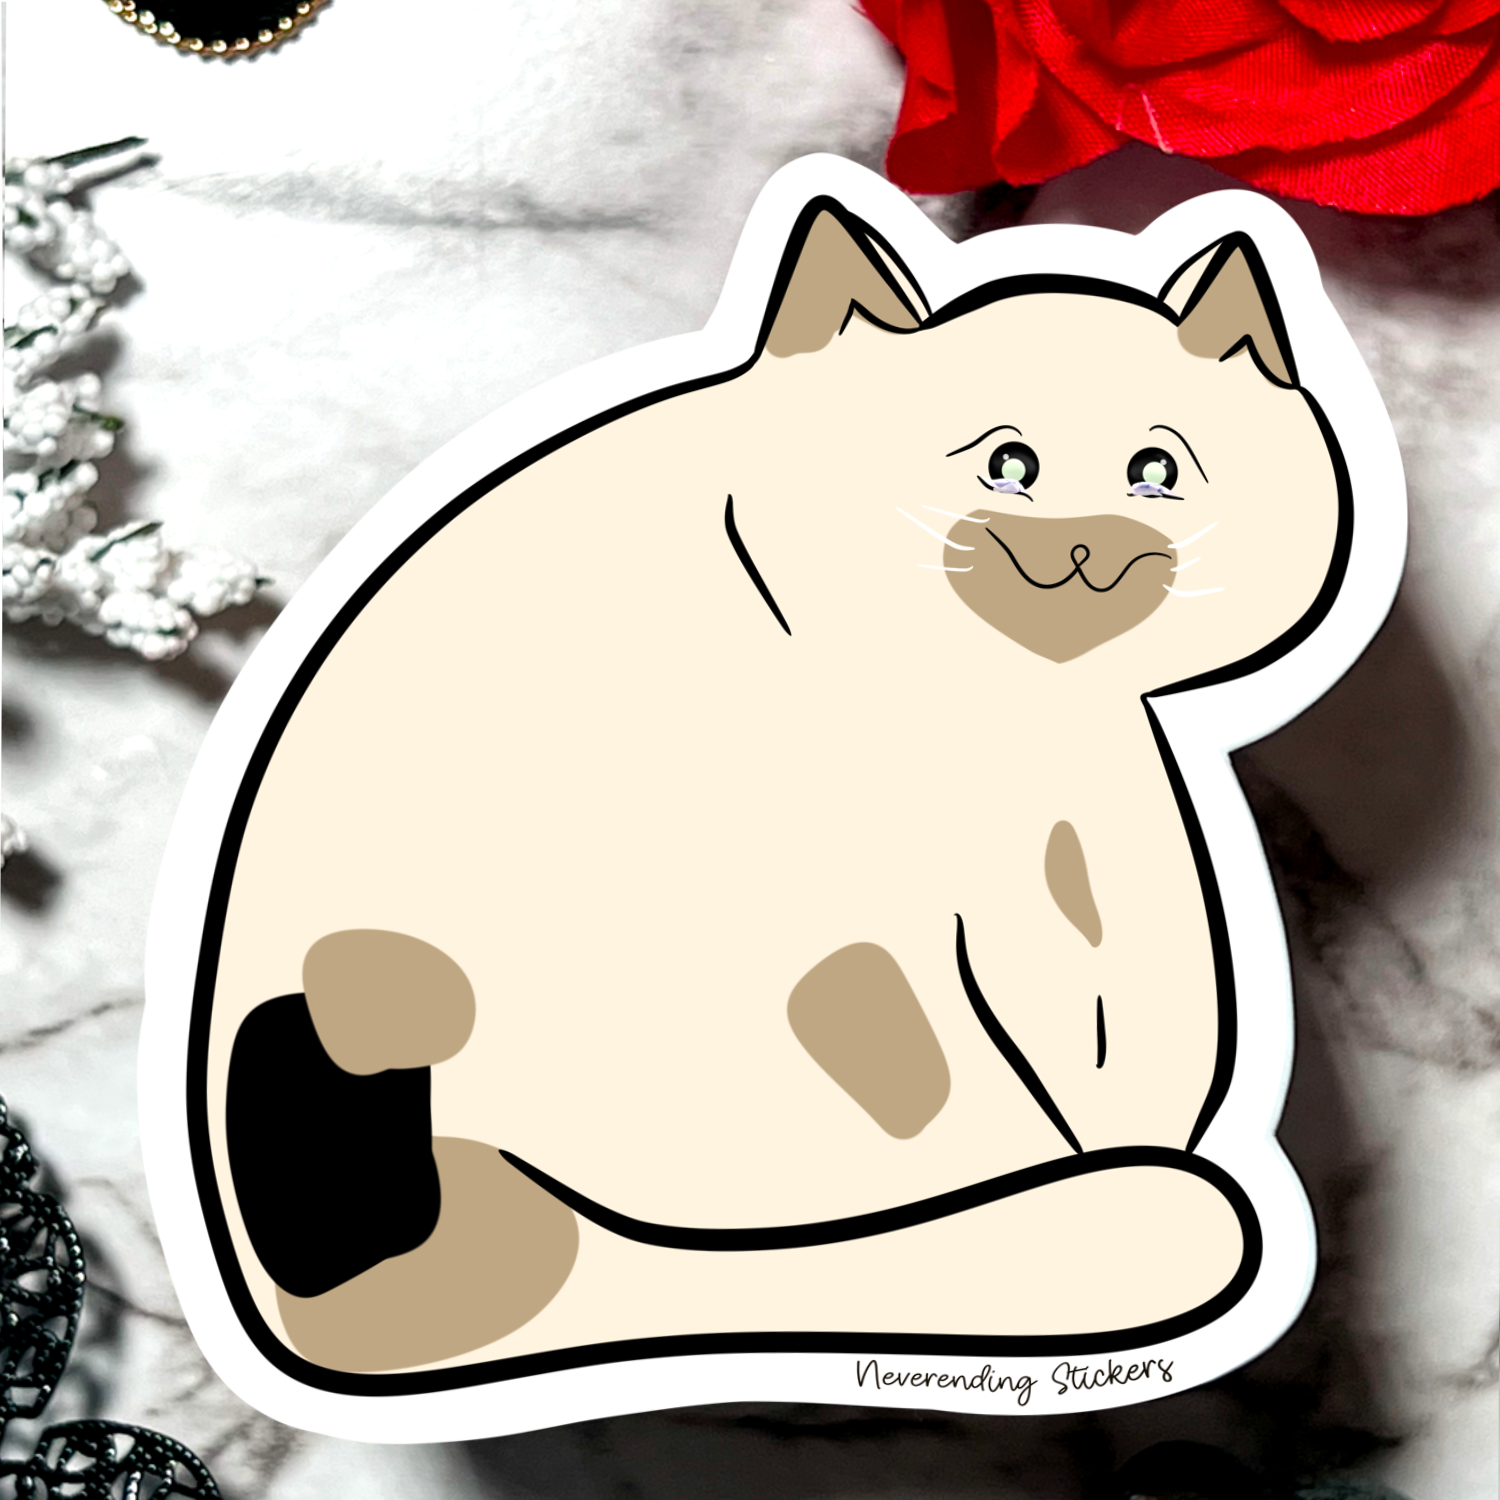 Neverending Stickers - Sad Cute Chunky Kitty - 3x3in Vinyl Sticker Or Magnet - Crying Cat